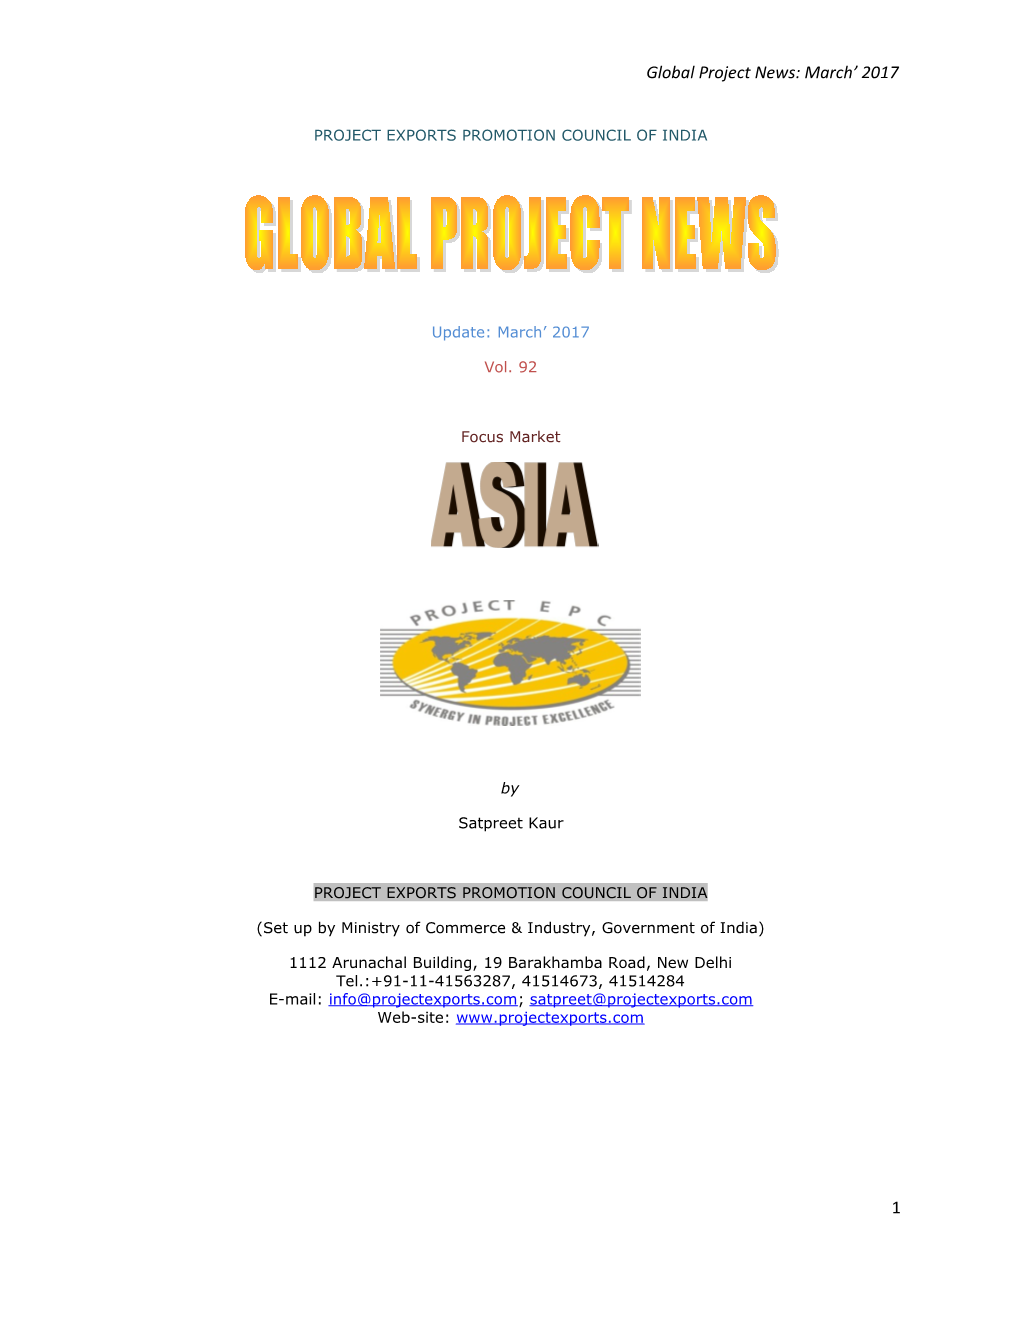 Project Exports Promotion Council of India